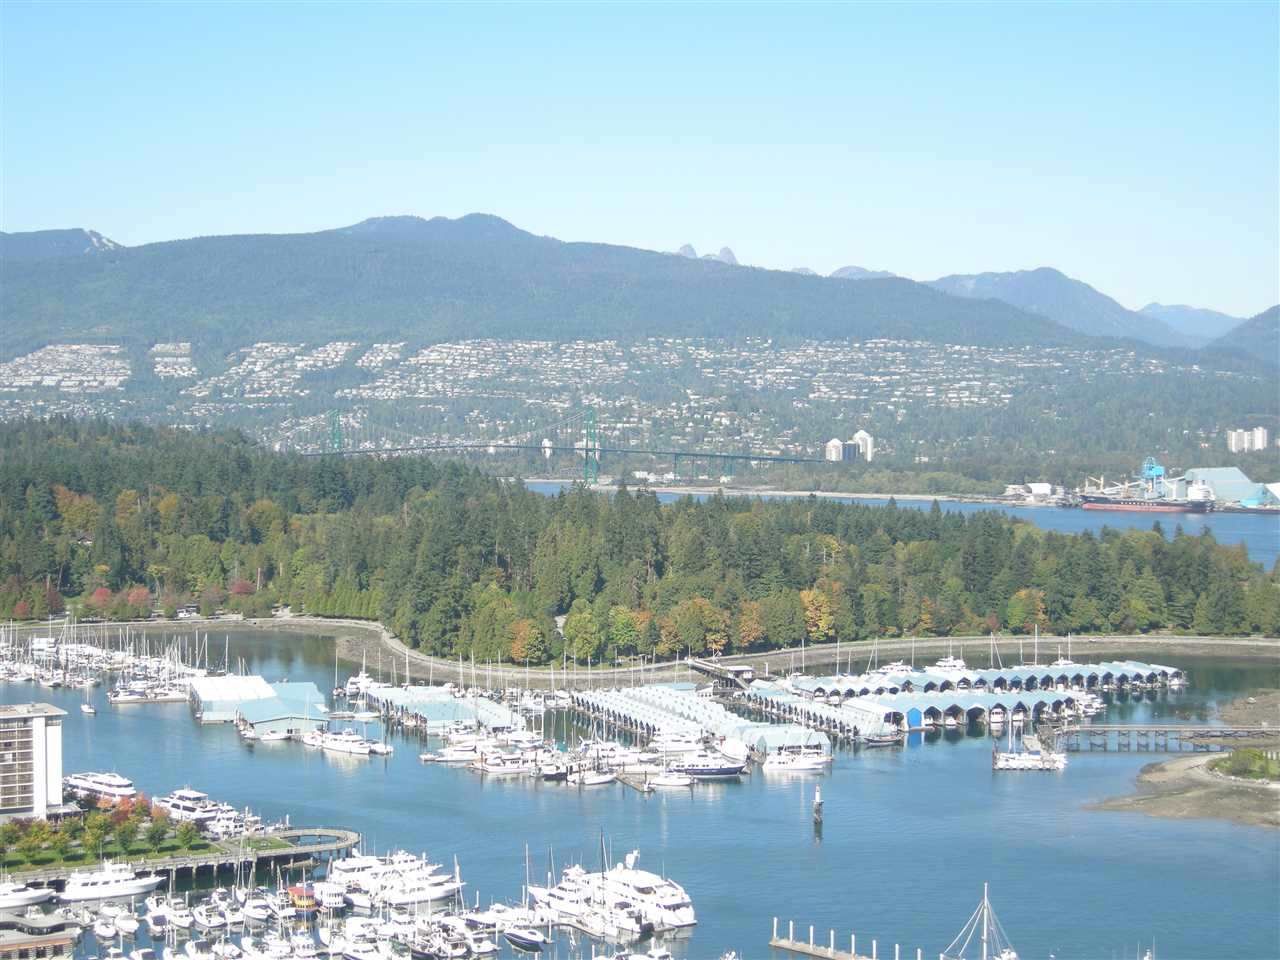 Main Photo: 1804 1211 MELVILLE STREET in : Coal Harbour Condo for sale : MLS®# R2421371